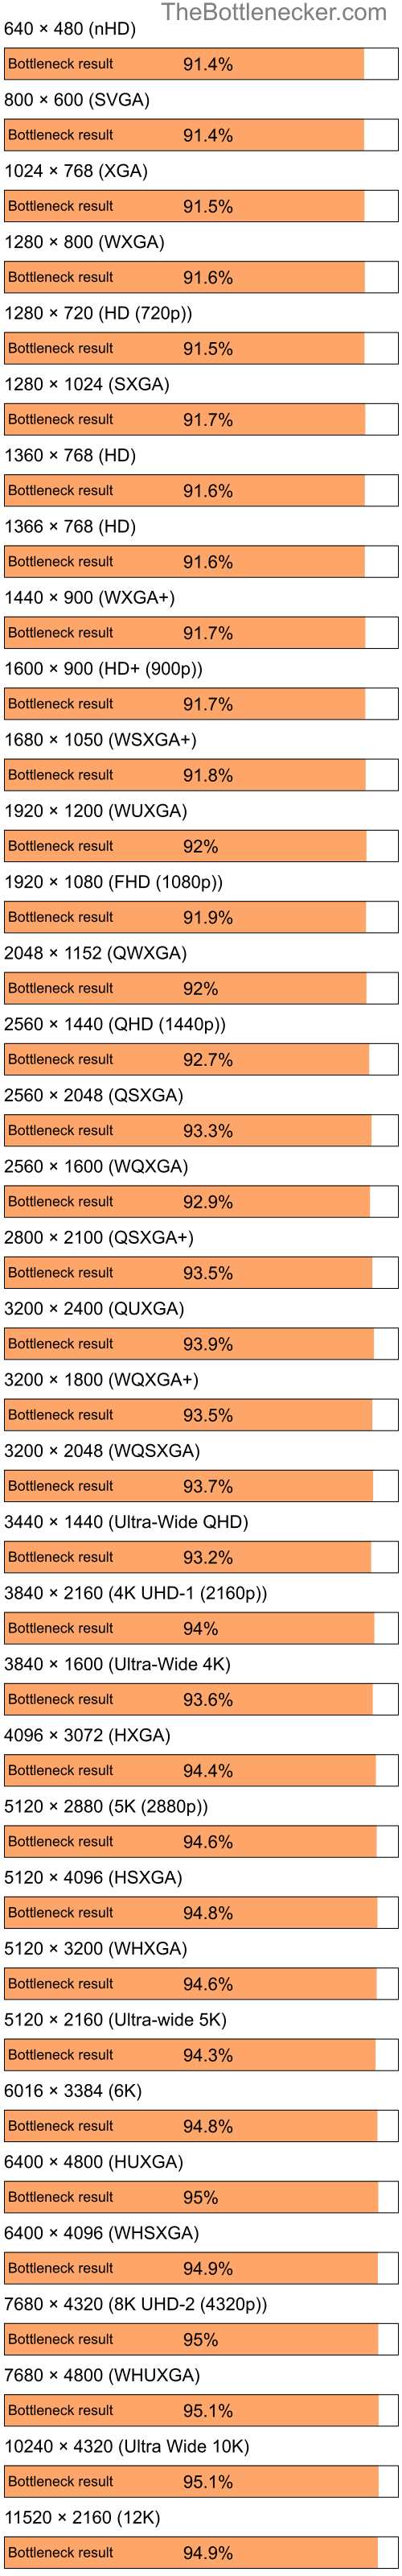 Bottleneck results by resolution for Intel Pentium 4 and AMD Radeon 9200 LE Family in General Tasks